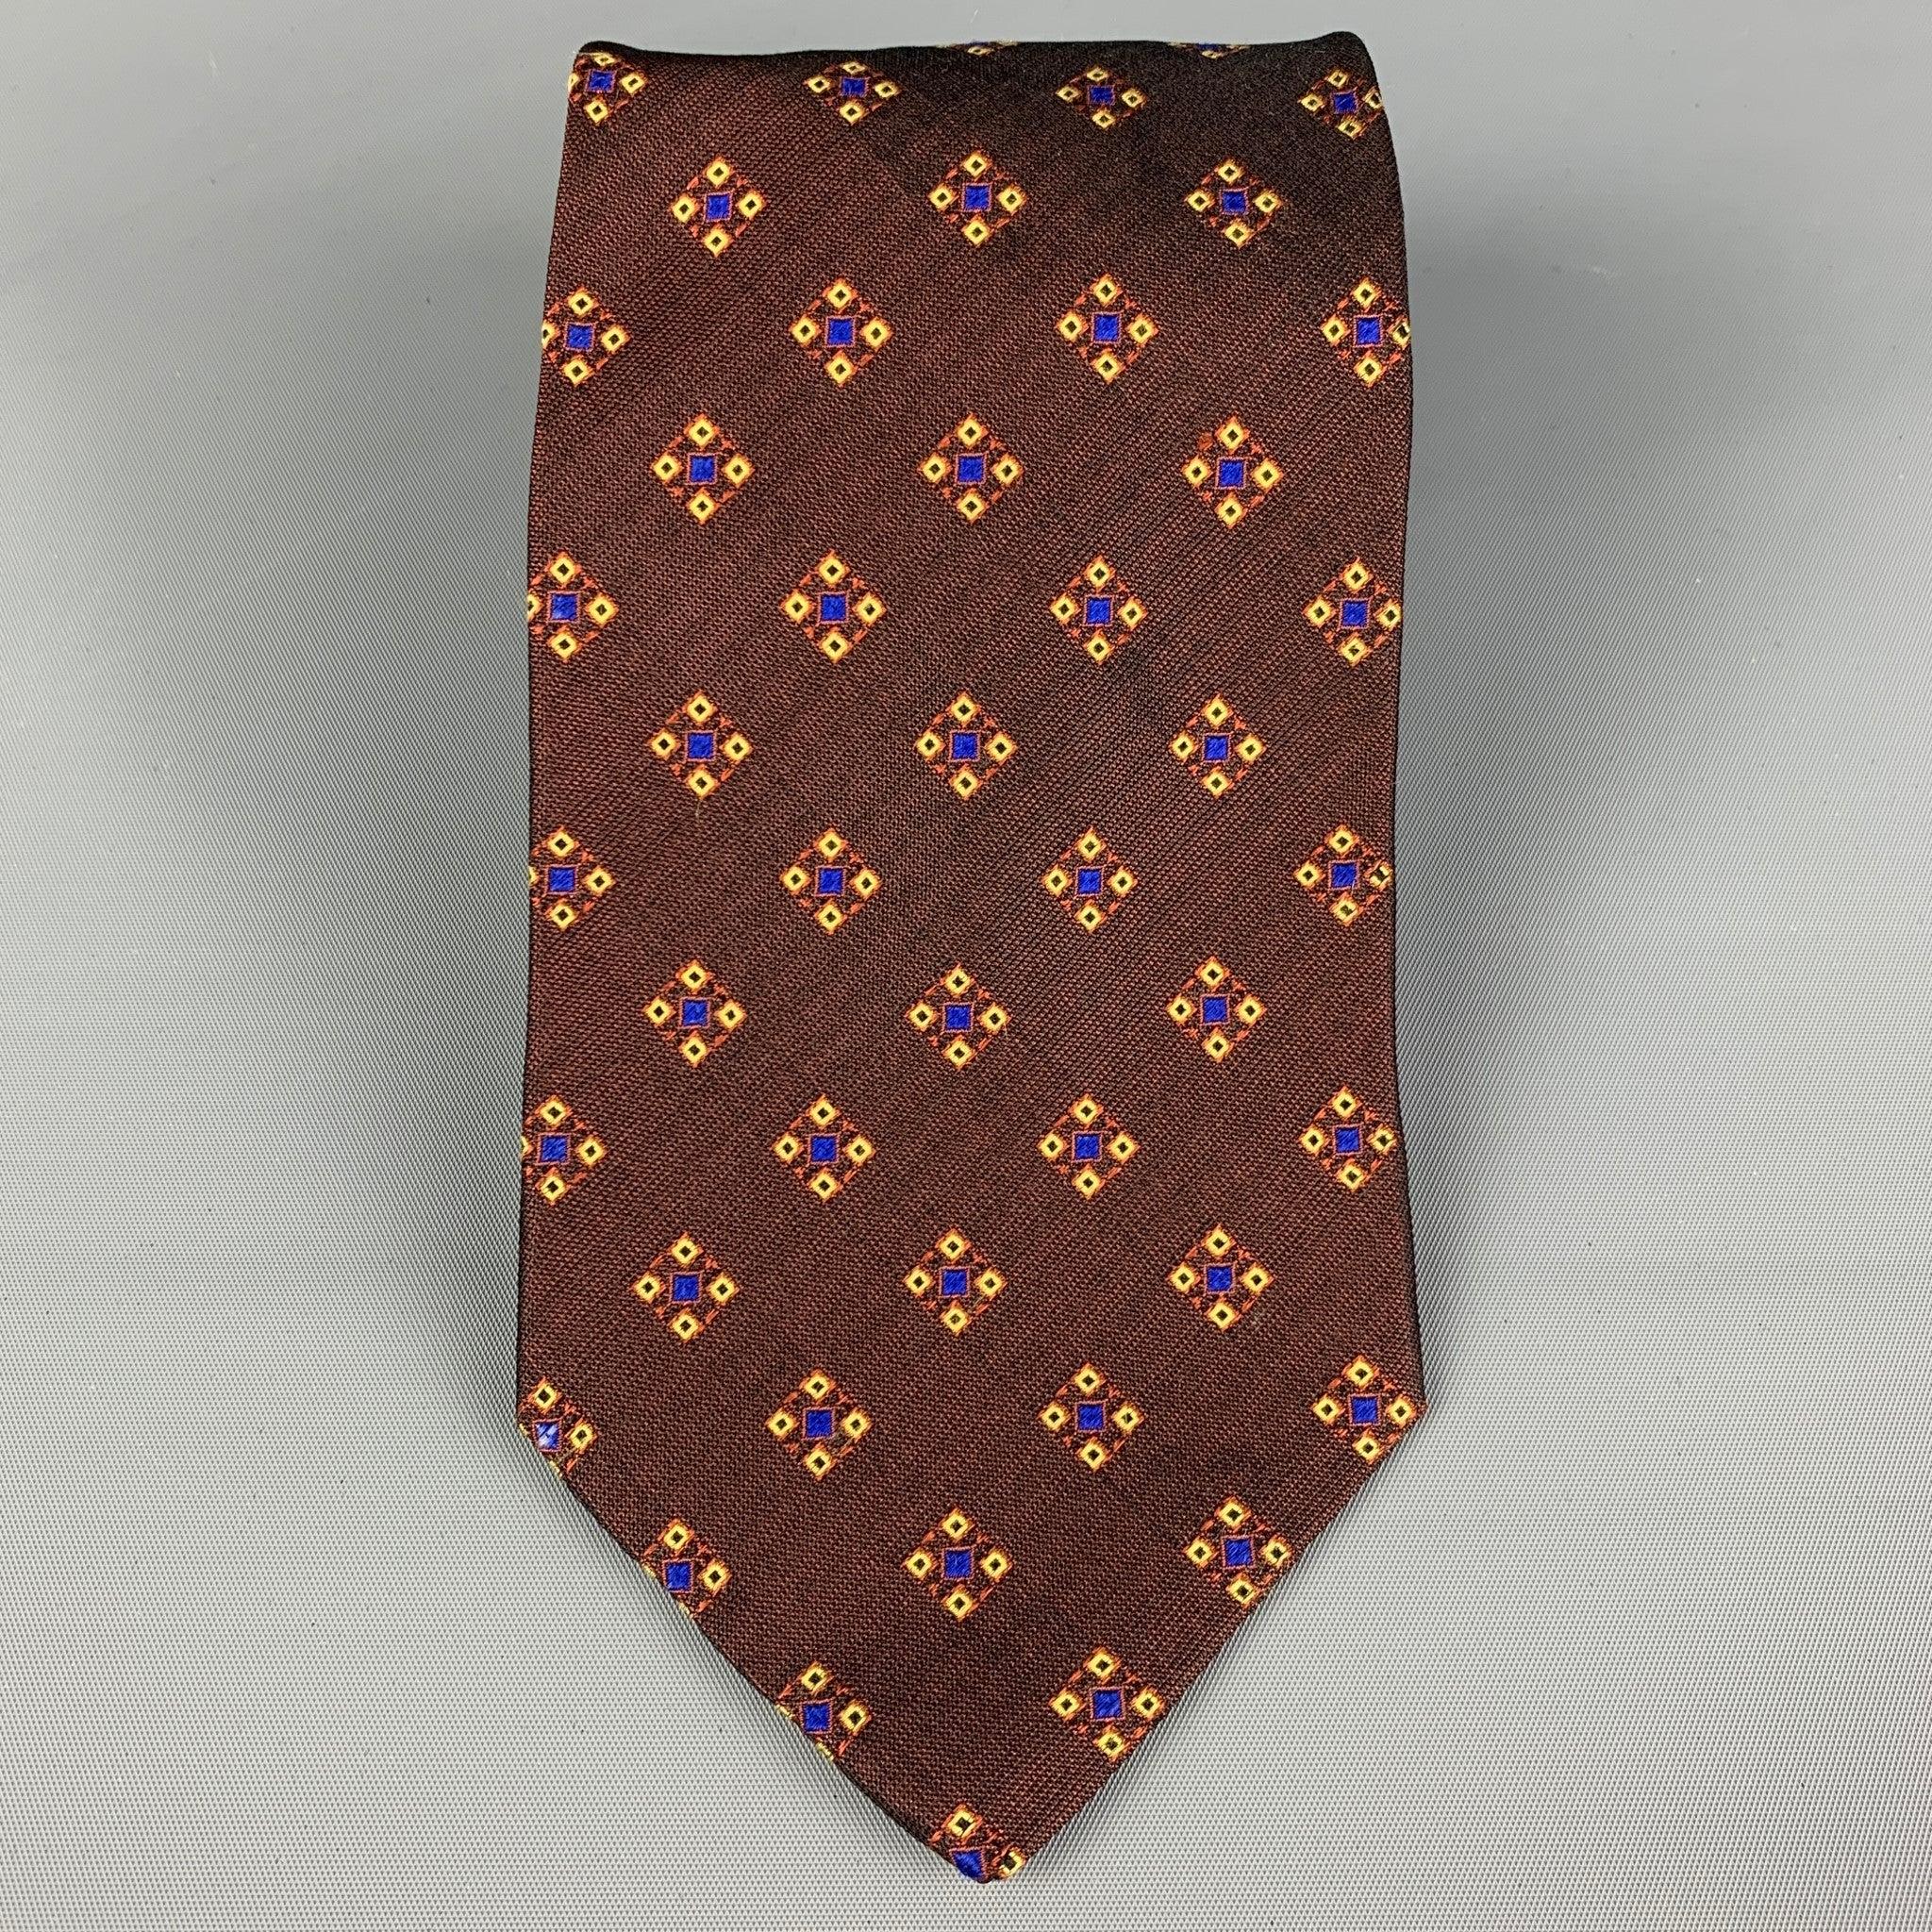 Vintage ROMEO GIGLI
necktie comes in a burgundy & yellow silk with a all over abstract print. Made in Italy. Very Good Pre-Owned Condition.Width: 3.75 inches 
  
  
 
Reference: 112523
Category: Tie
More Details
    
Brand:  ROMEO GIGLI
Color: 